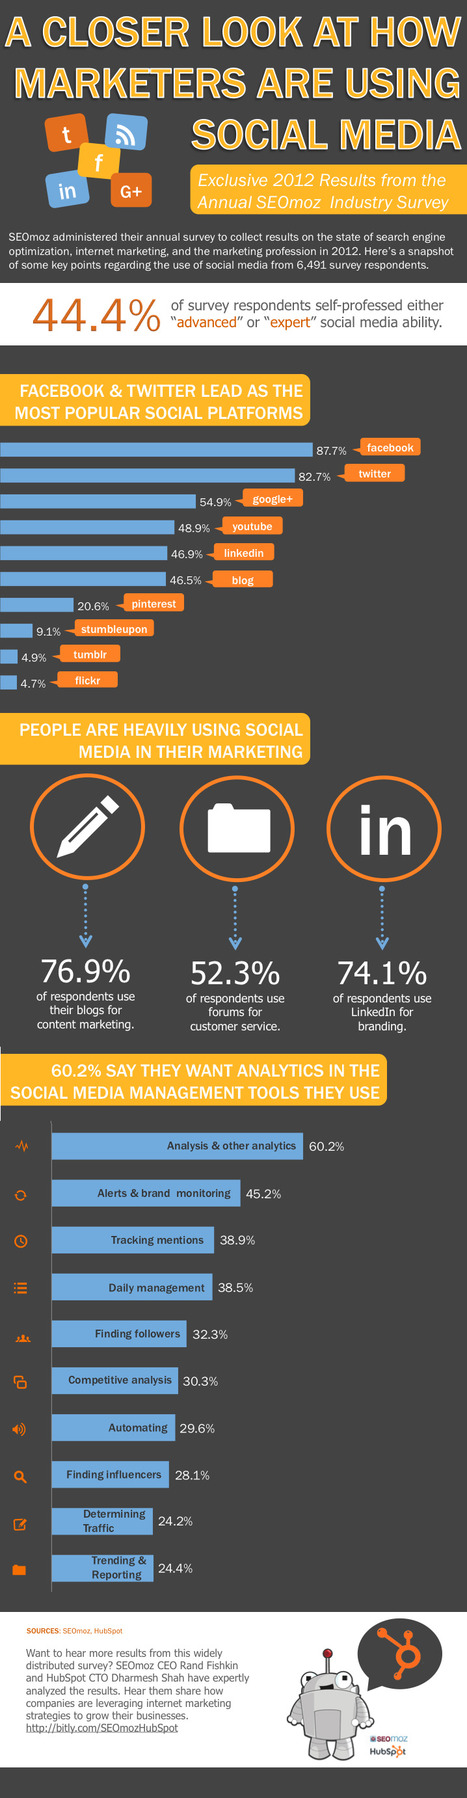 [INFOGRAPHIC] A Closer Look At How Marketers Are Using Social Media - Croakun | The MarTech Digest | Scoop.it